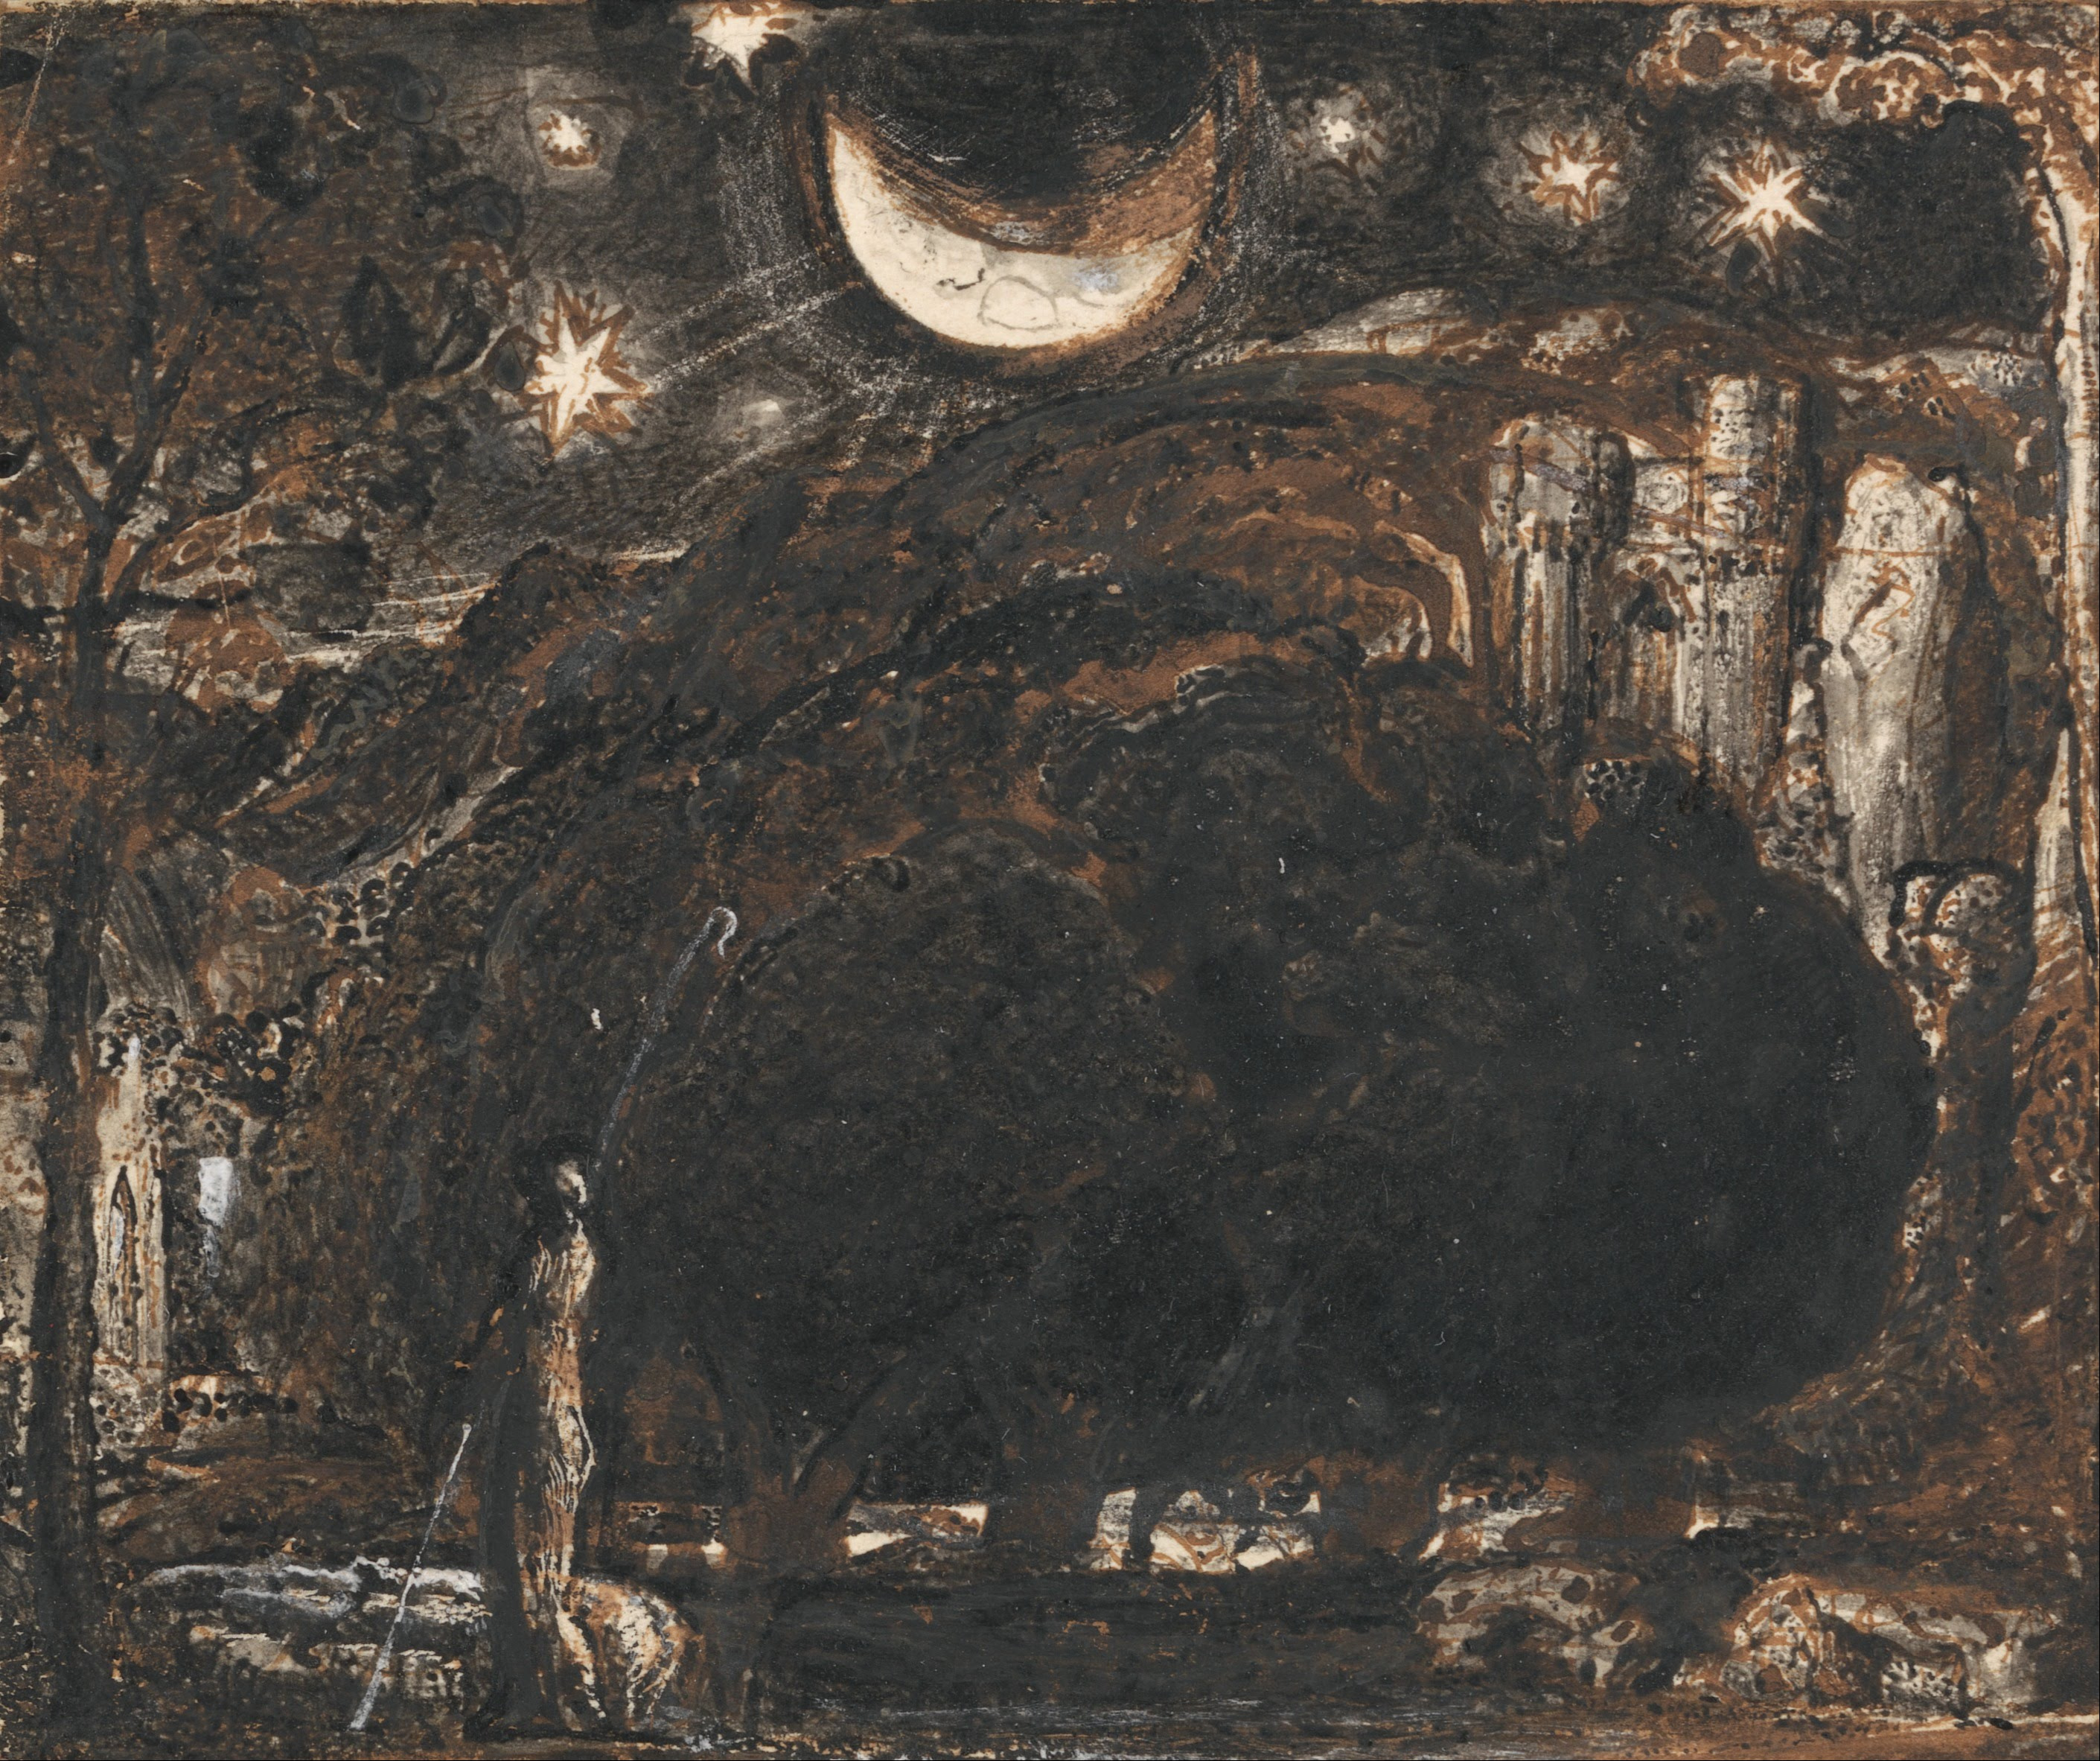 Samuel Palmer - A Shepherd and his Flock under the Moon and Stars - Google Art Project